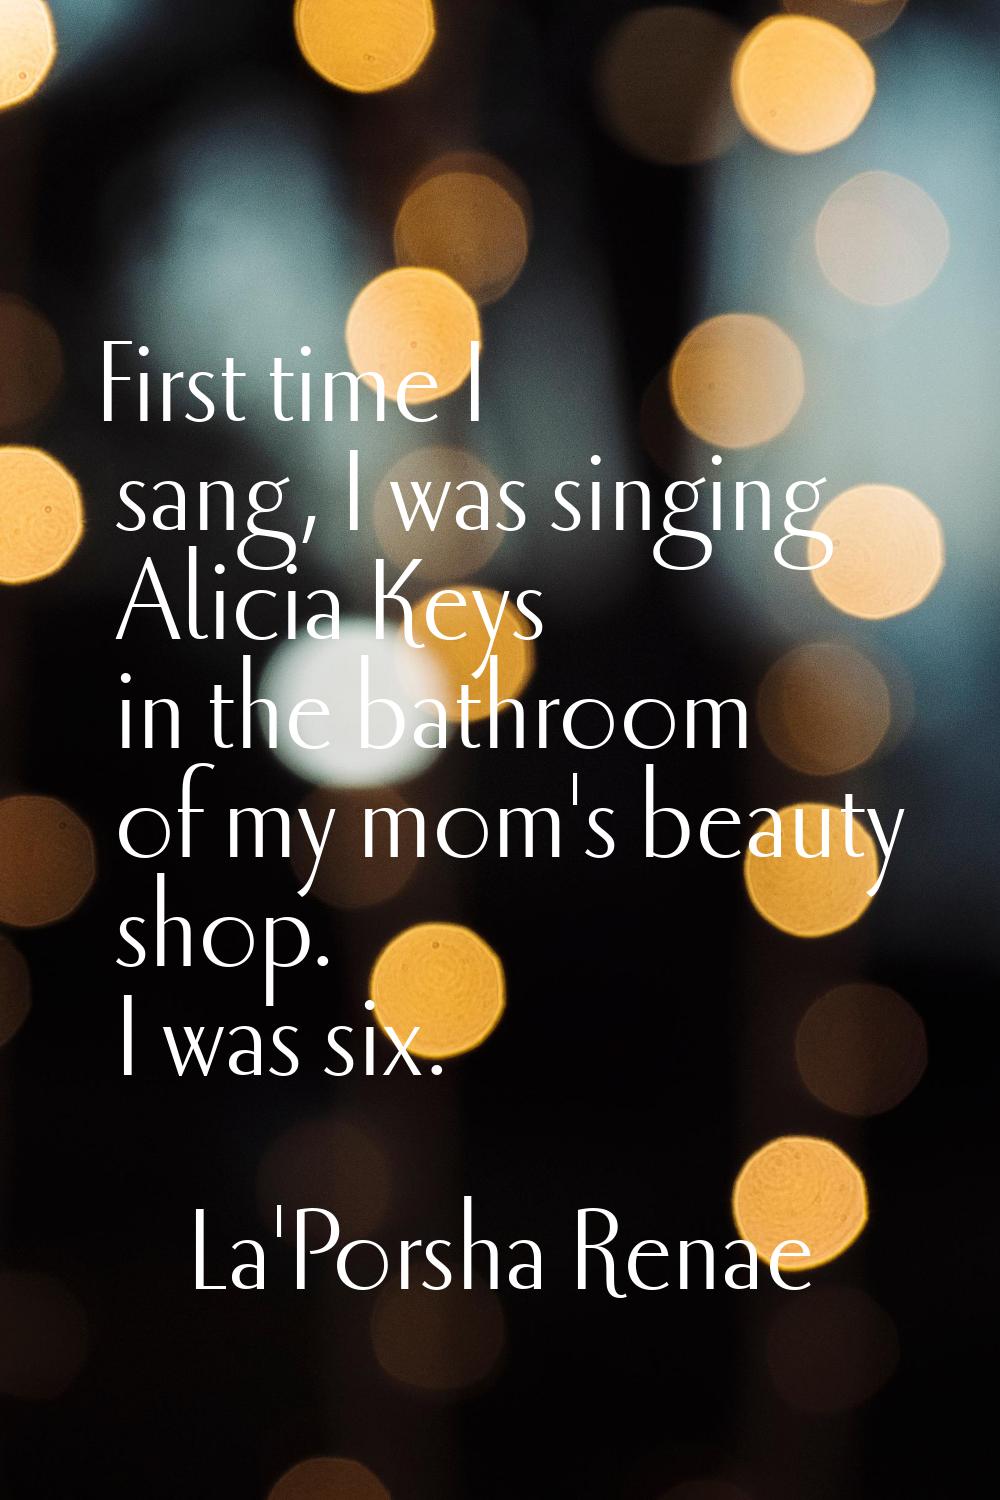 First time I sang, I was singing Alicia Keys in the bathroom of my mom's beauty shop. I was six.